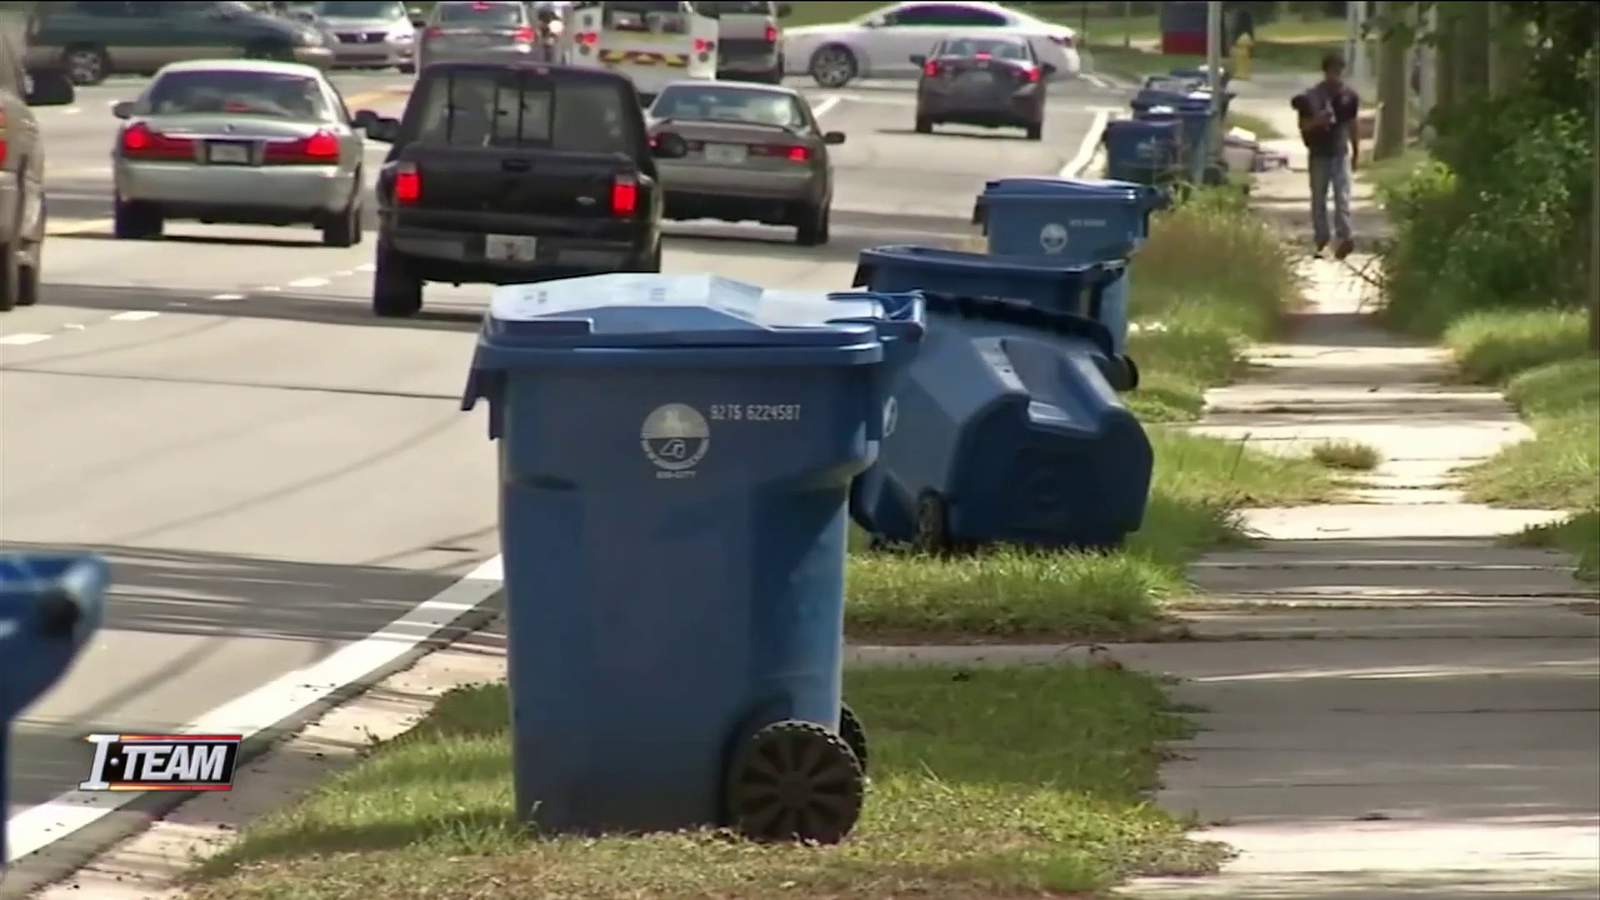 Trash company with history of complaints asks city for second chance